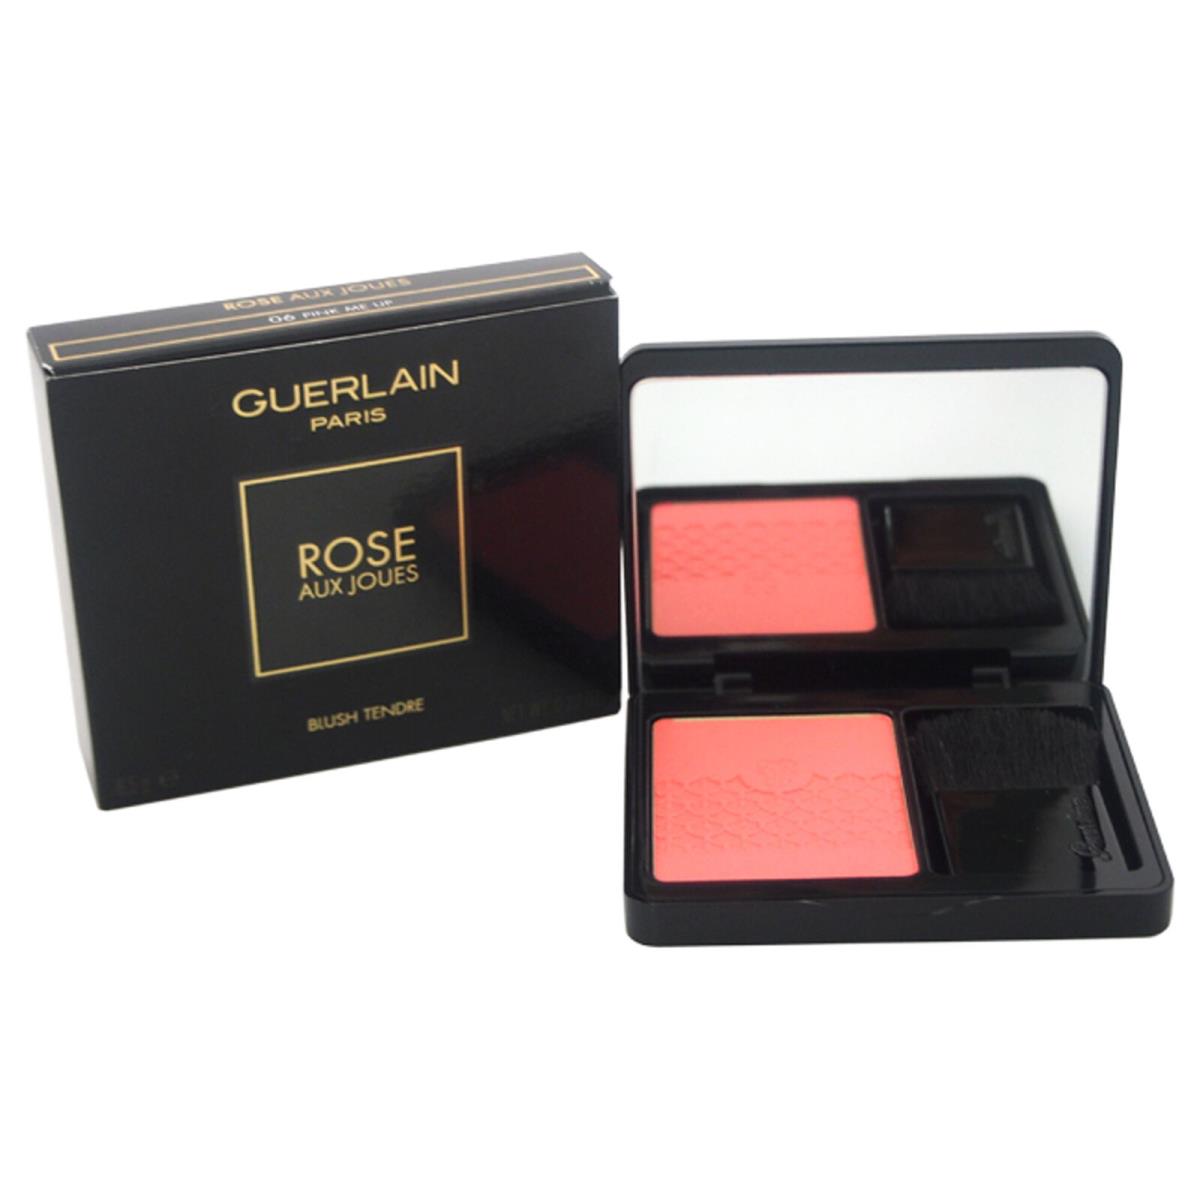 Rose Aux Joues Tender Blush - 06 Pink Me Up by Guerlain For Women - 0.22 oz